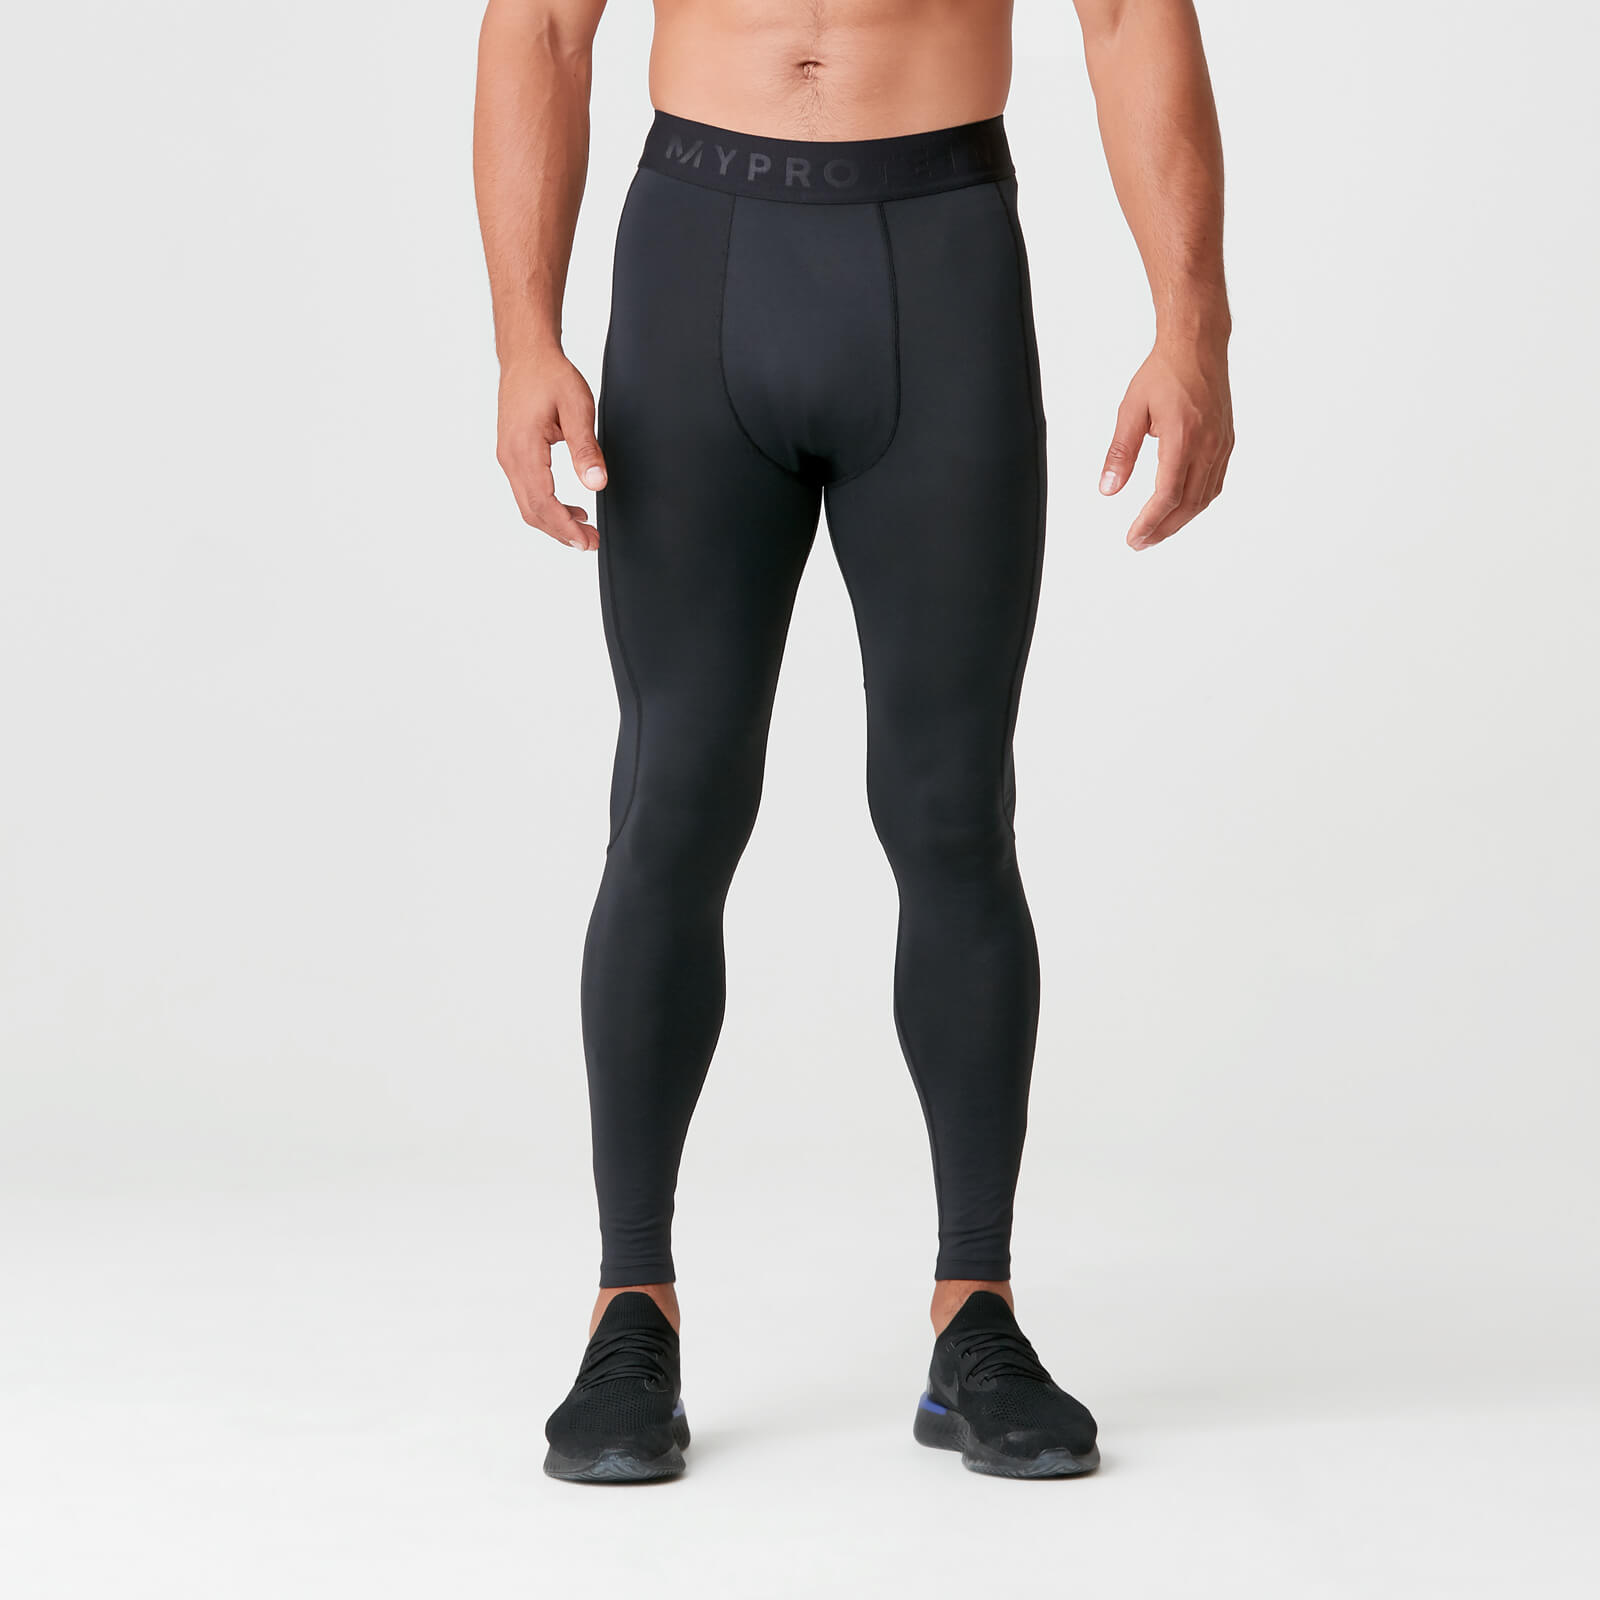 MP Men's Charge Compression Tights - Black - S